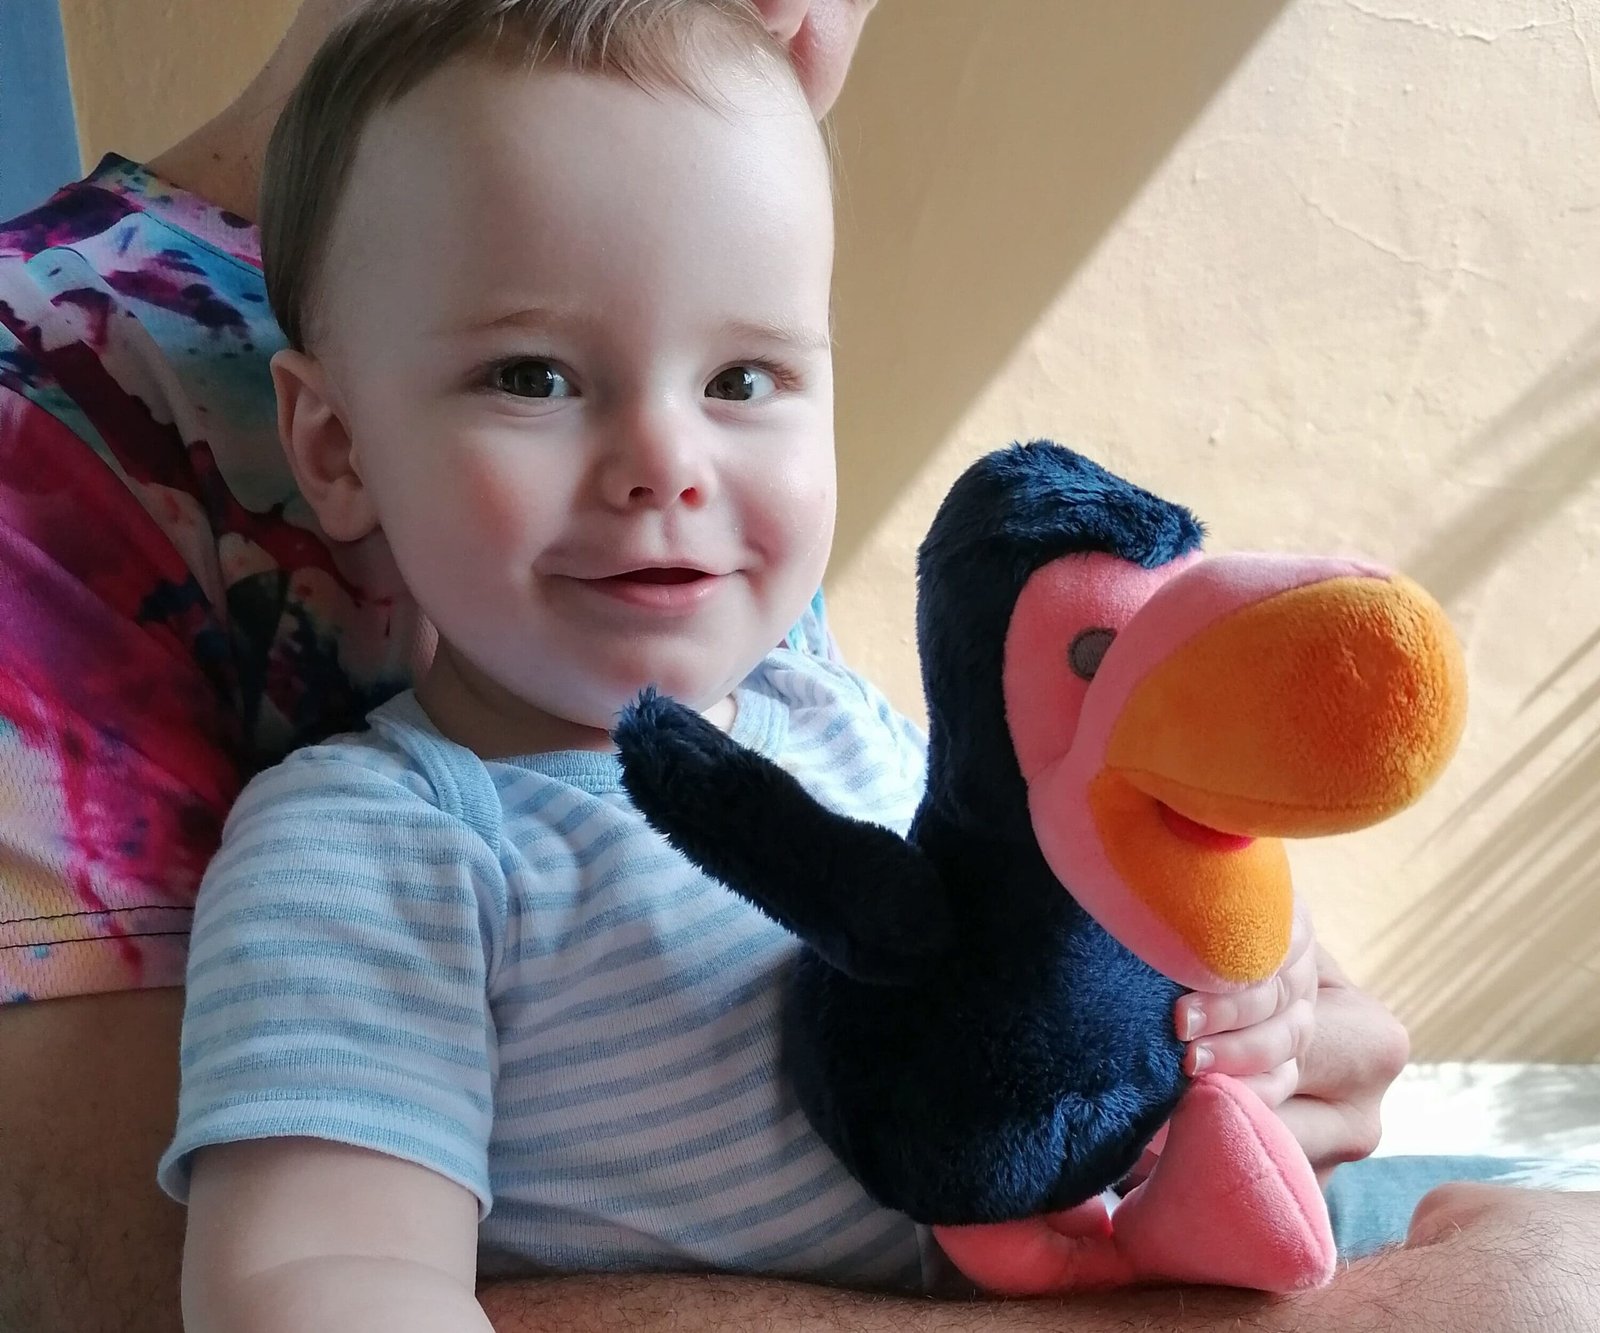 A smiling toddler holding a dodo stuffed toy which is one of the most common Mauritius souvenirs.